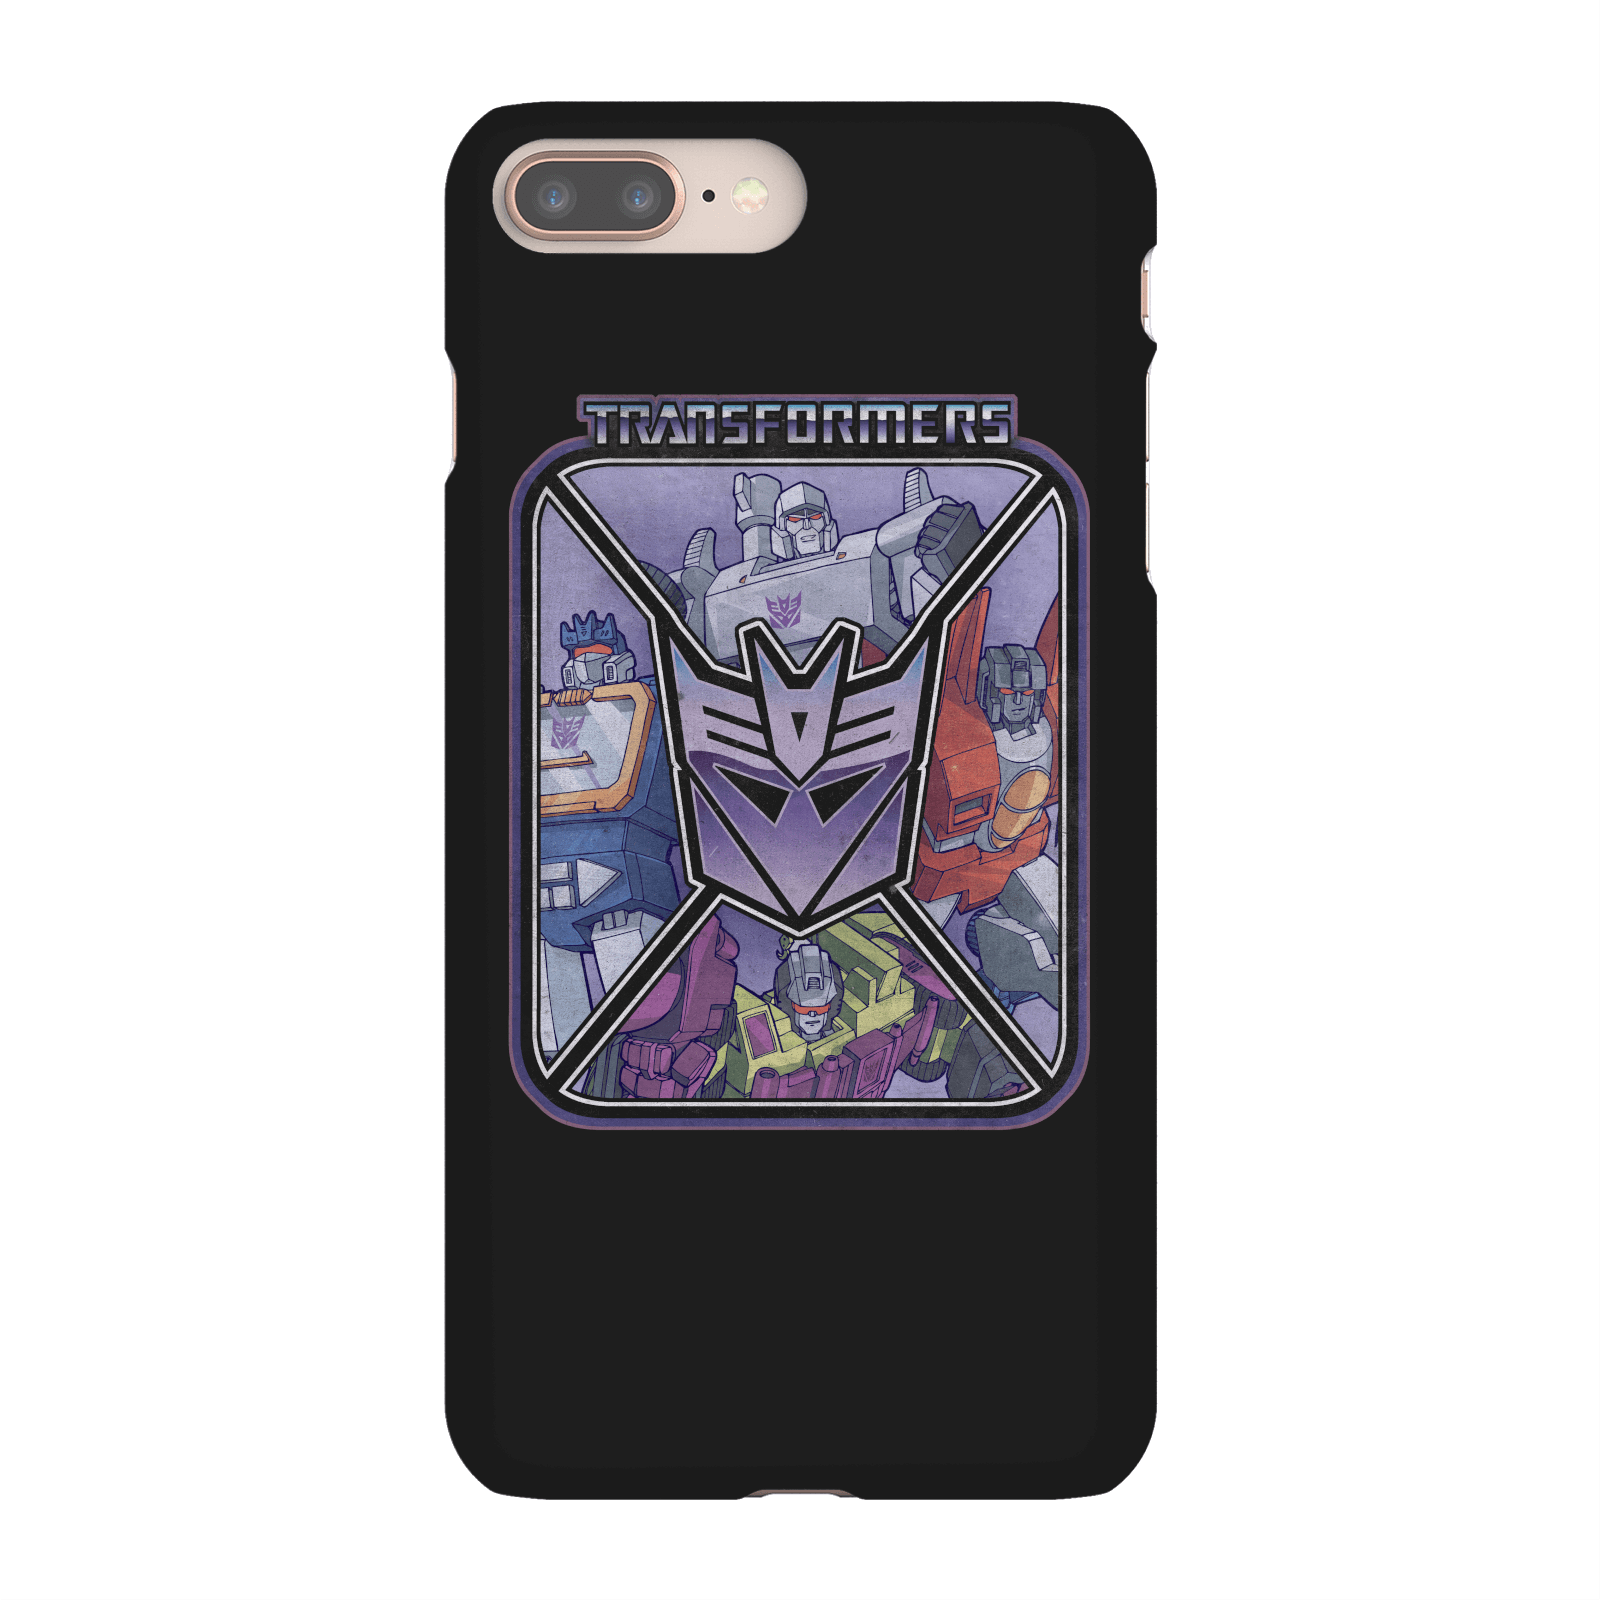 Transformers Decepticons Phone Case for iPhone and Android - iPhone 6 Plus - Snap Case - Matte